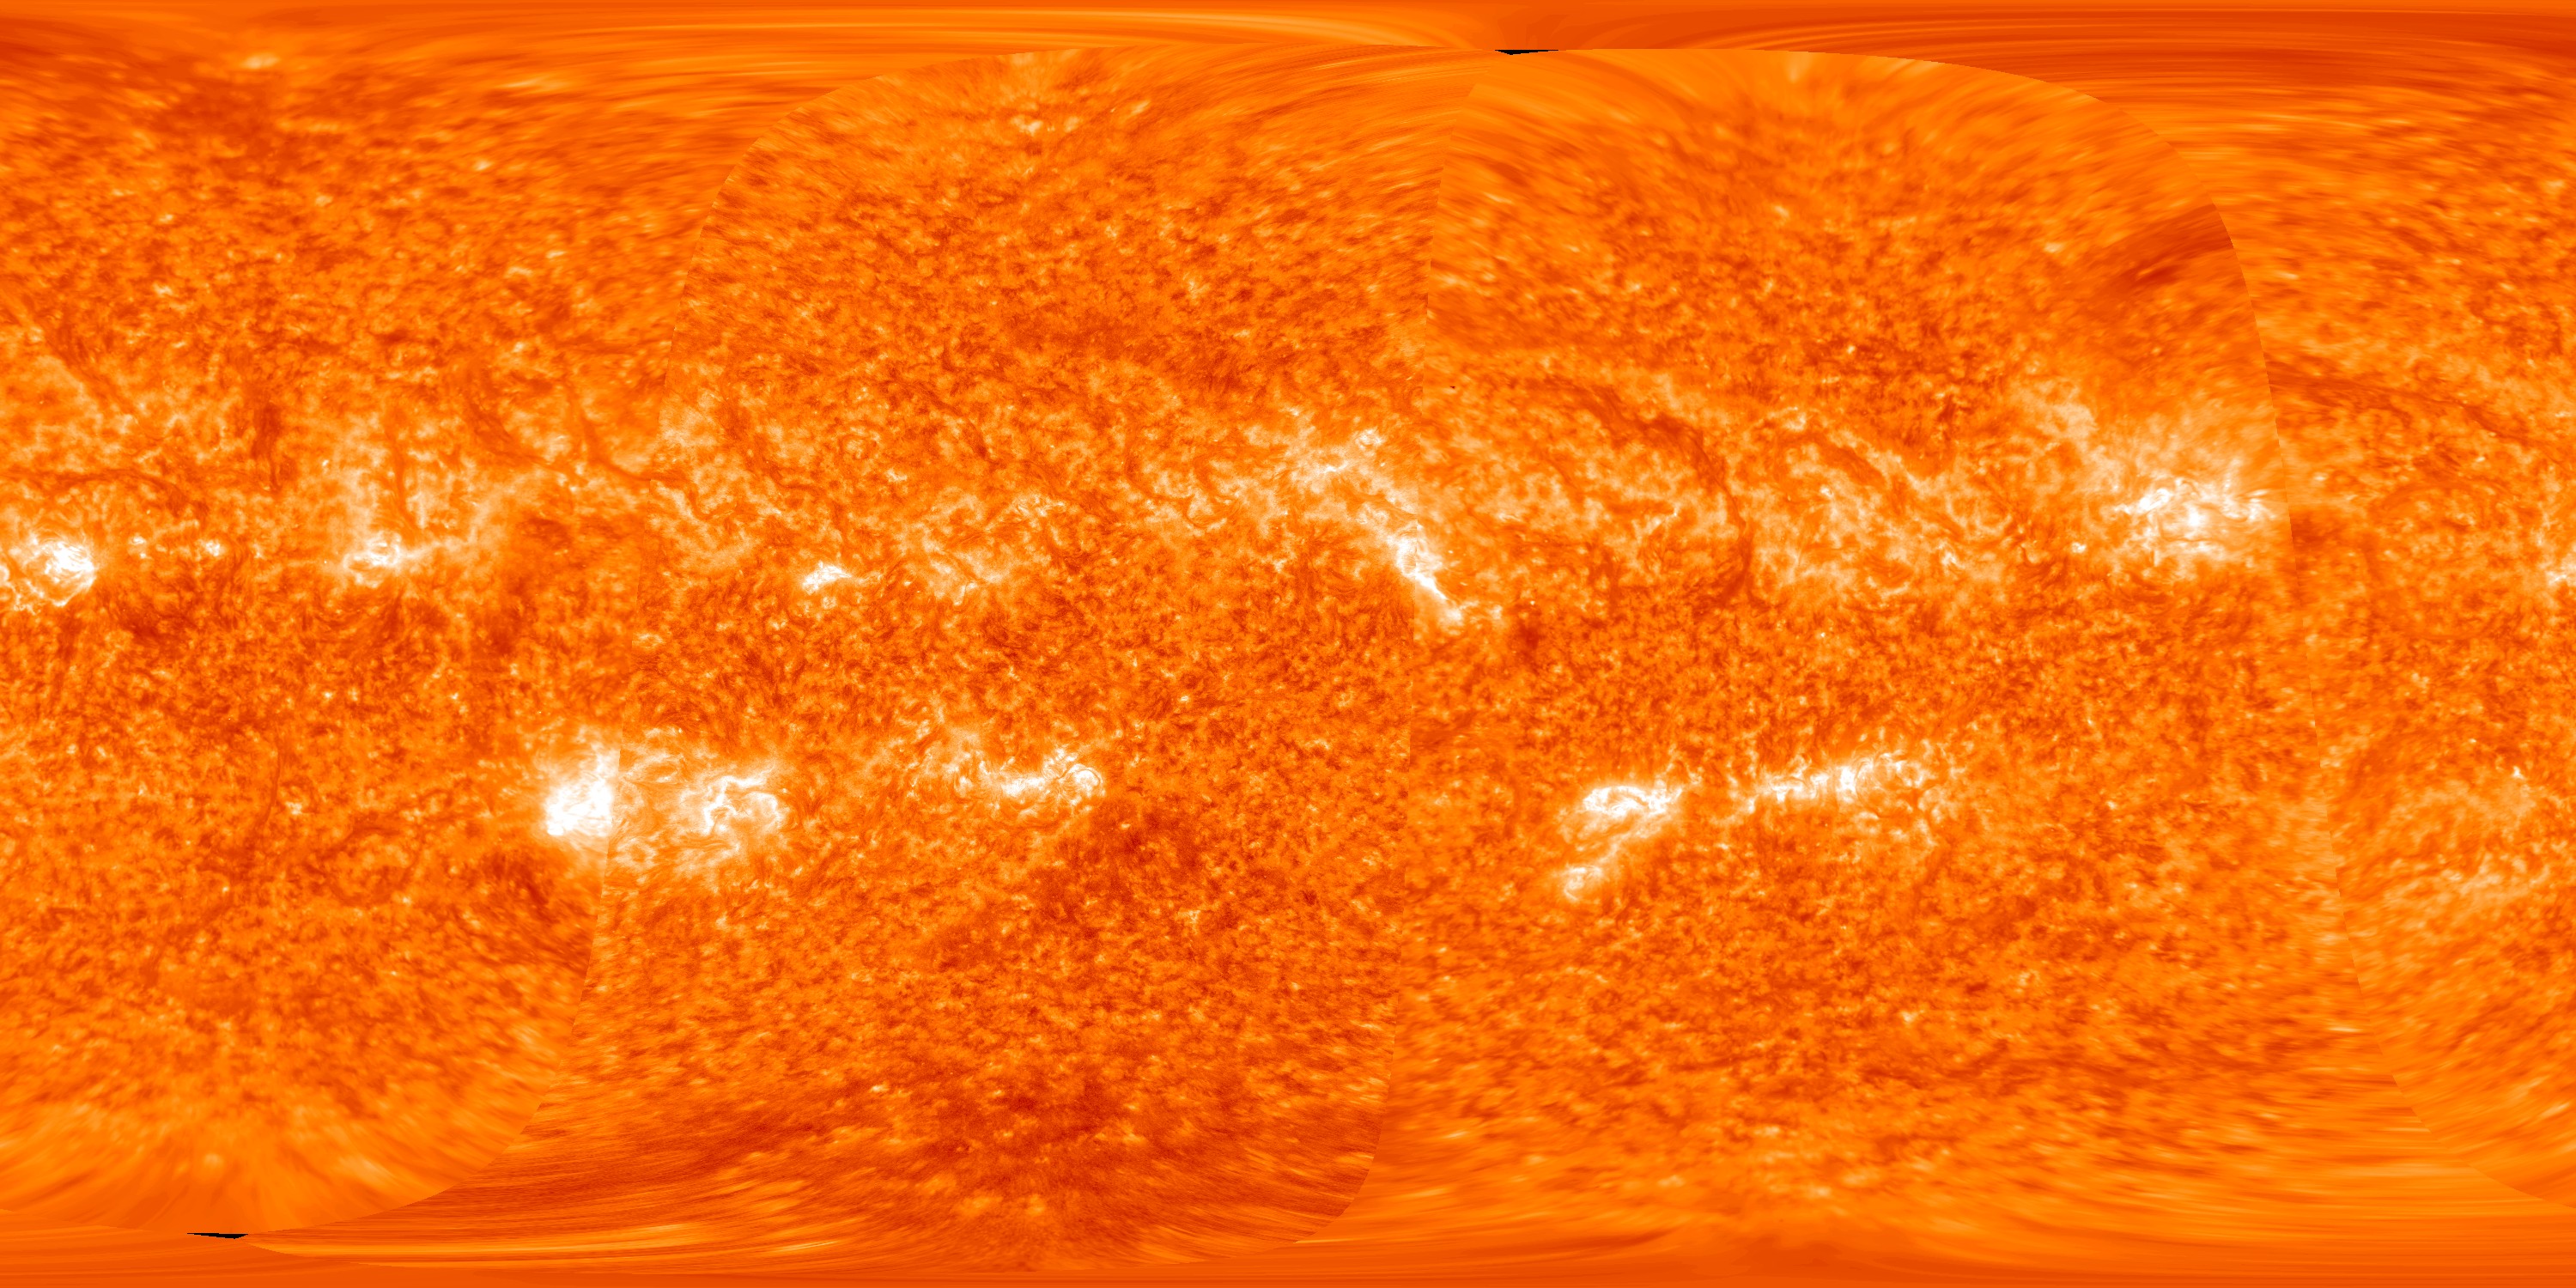 Combined map with STEREO and SDO